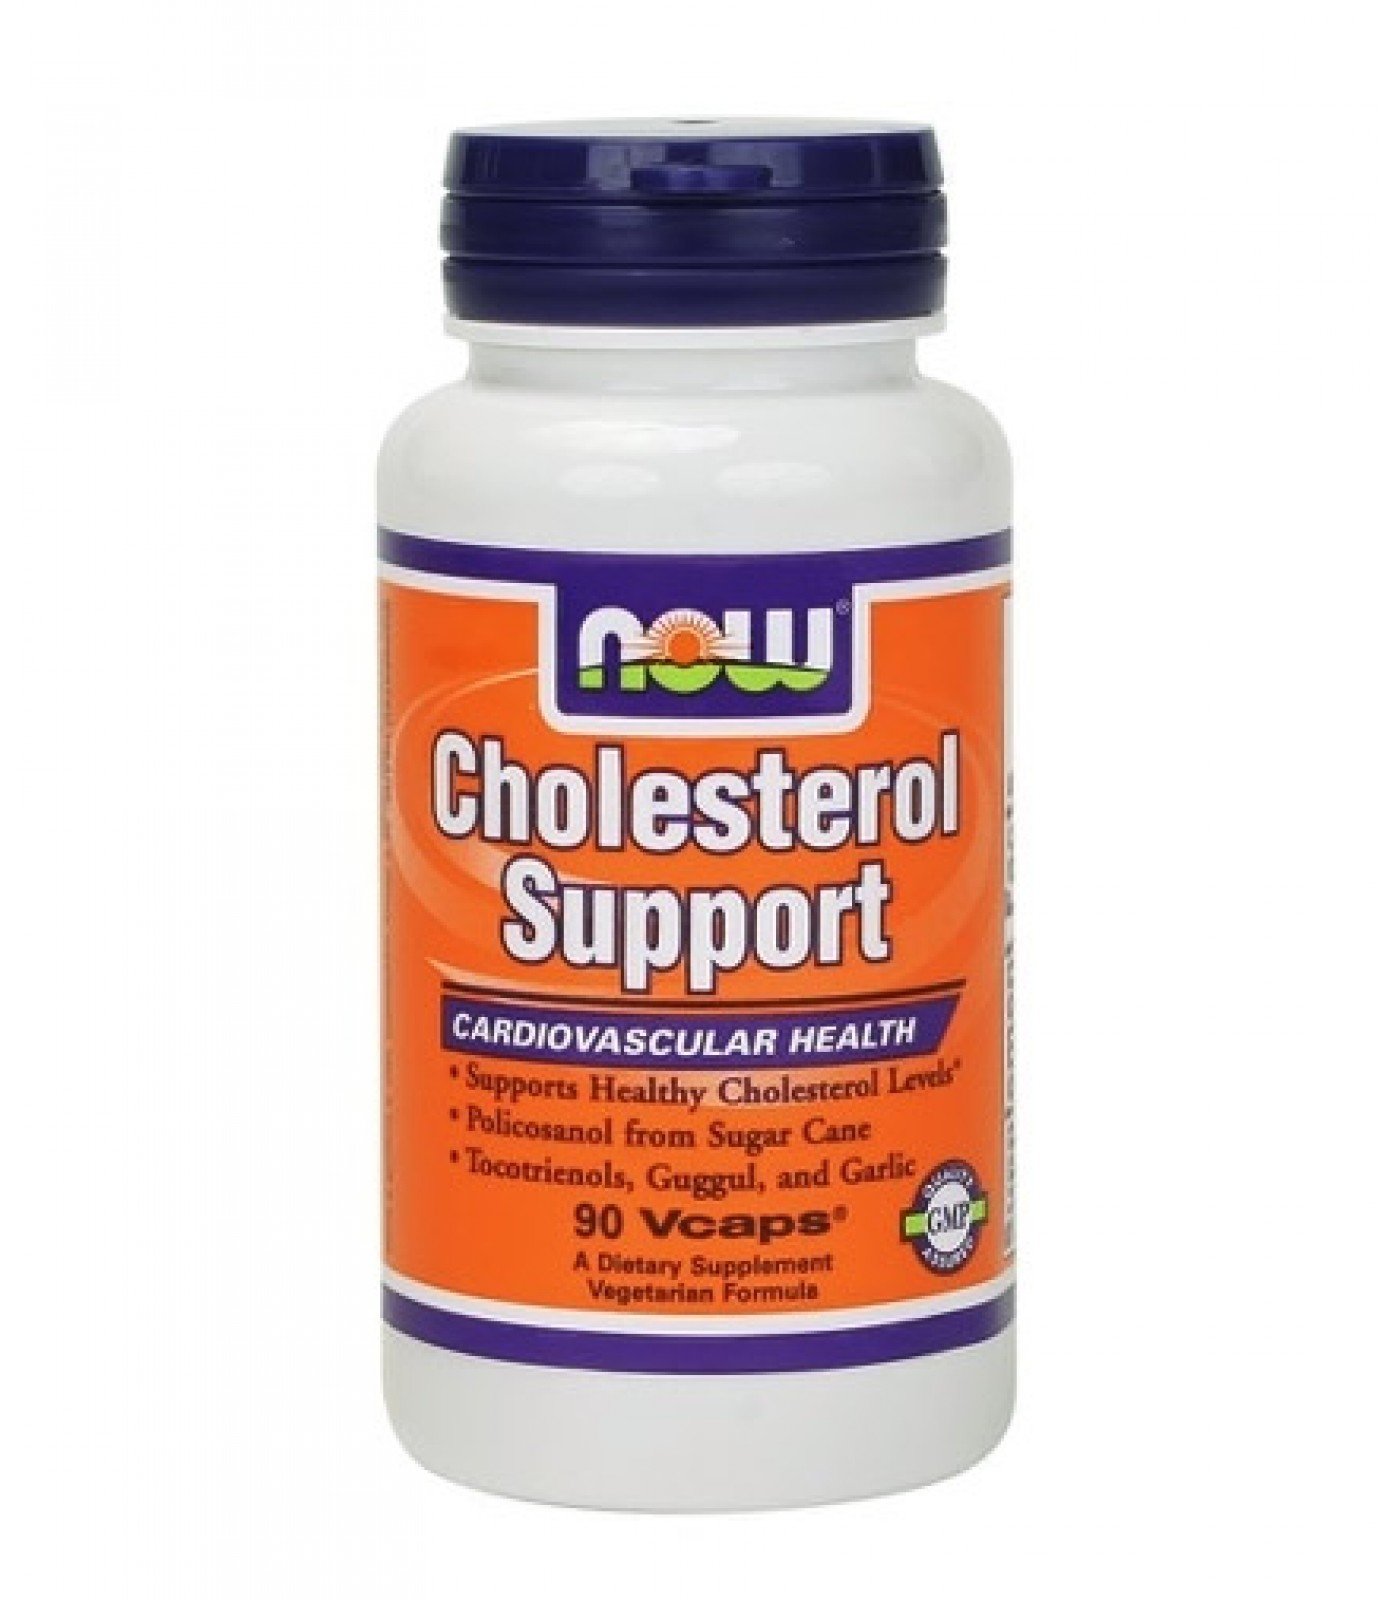 NOW - Cholesterol Support / 90 VCaps.